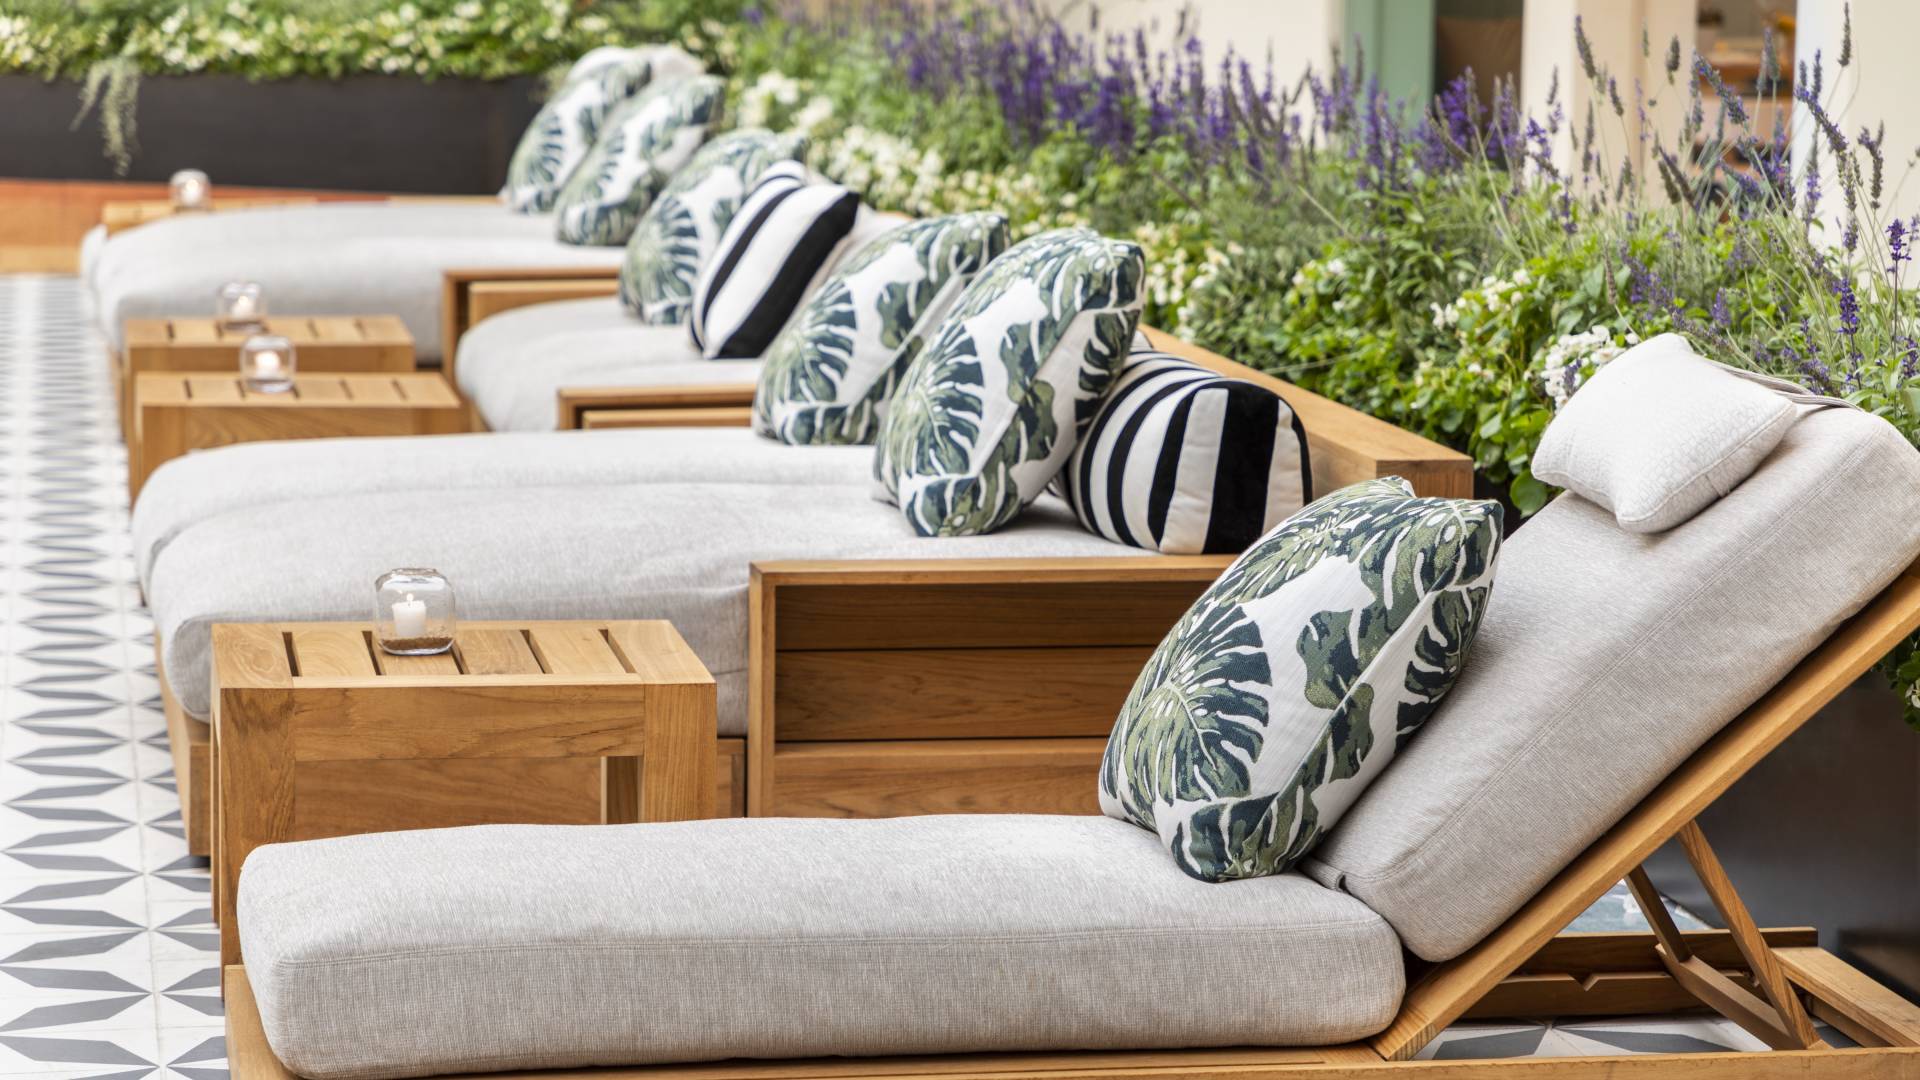 Loungers by the pool with pillows